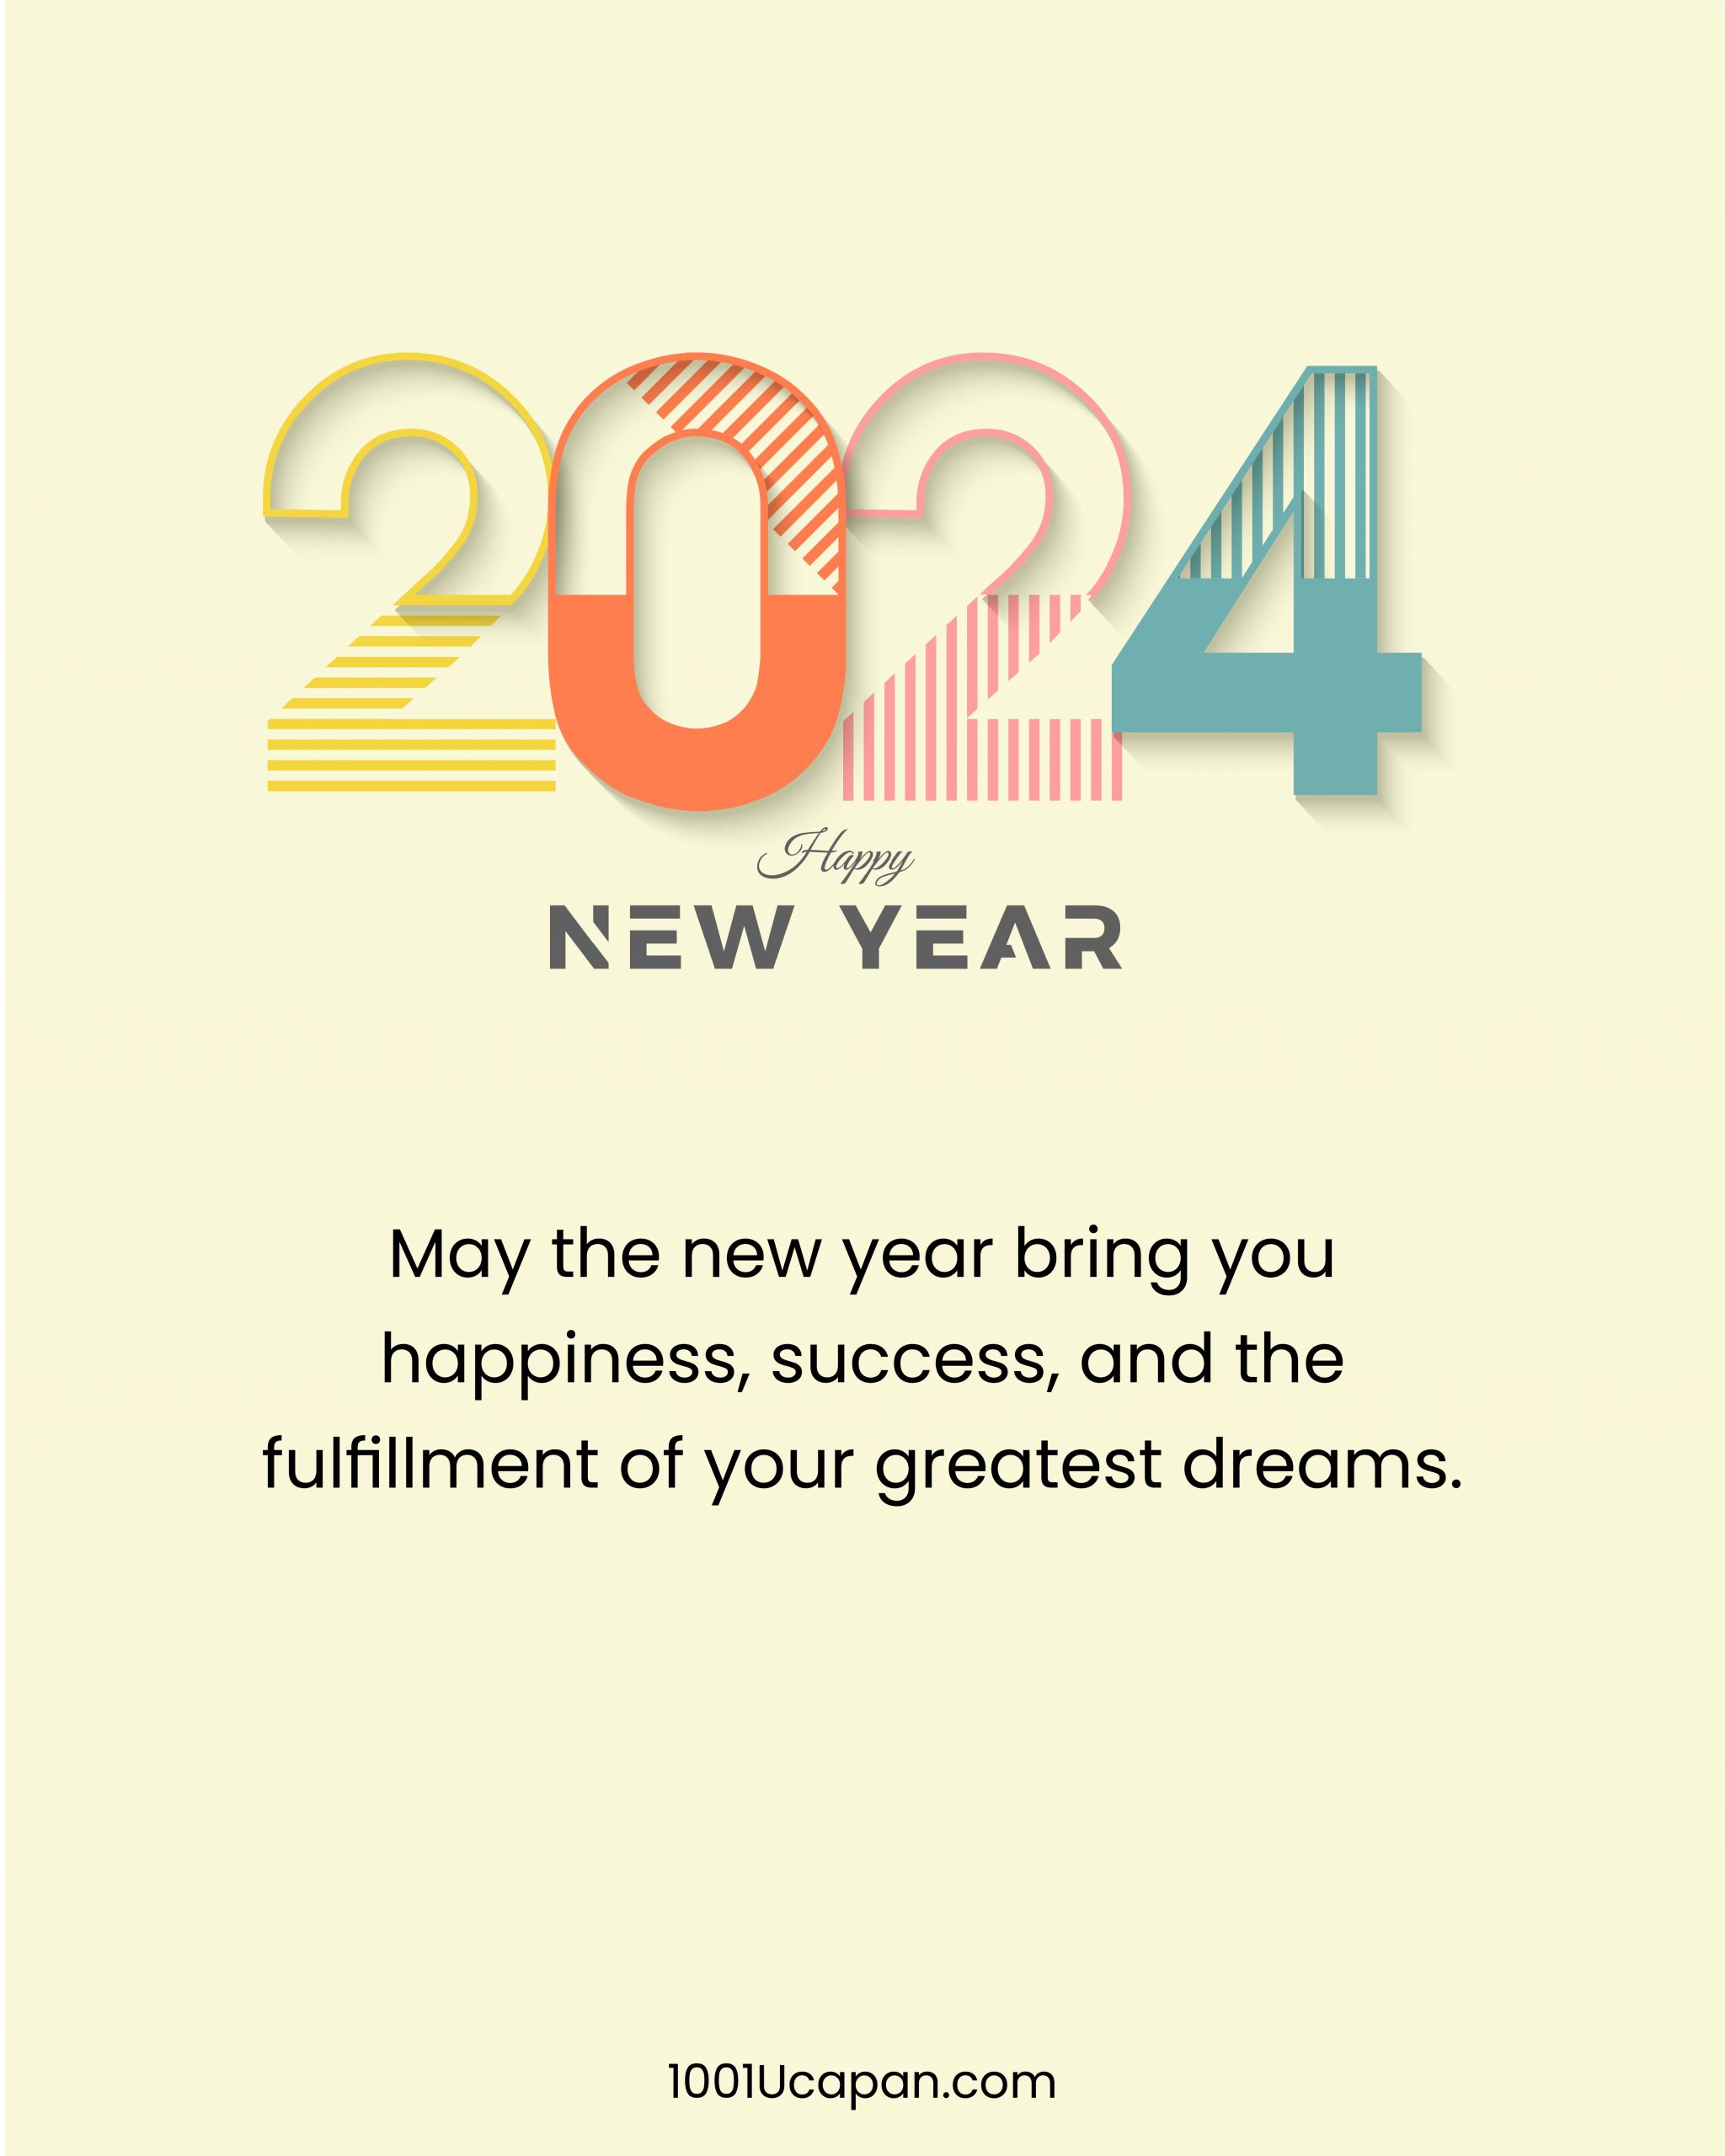 250 Happy New Year 2024 Wishes, Quotes, Messages 1001 Ucapan